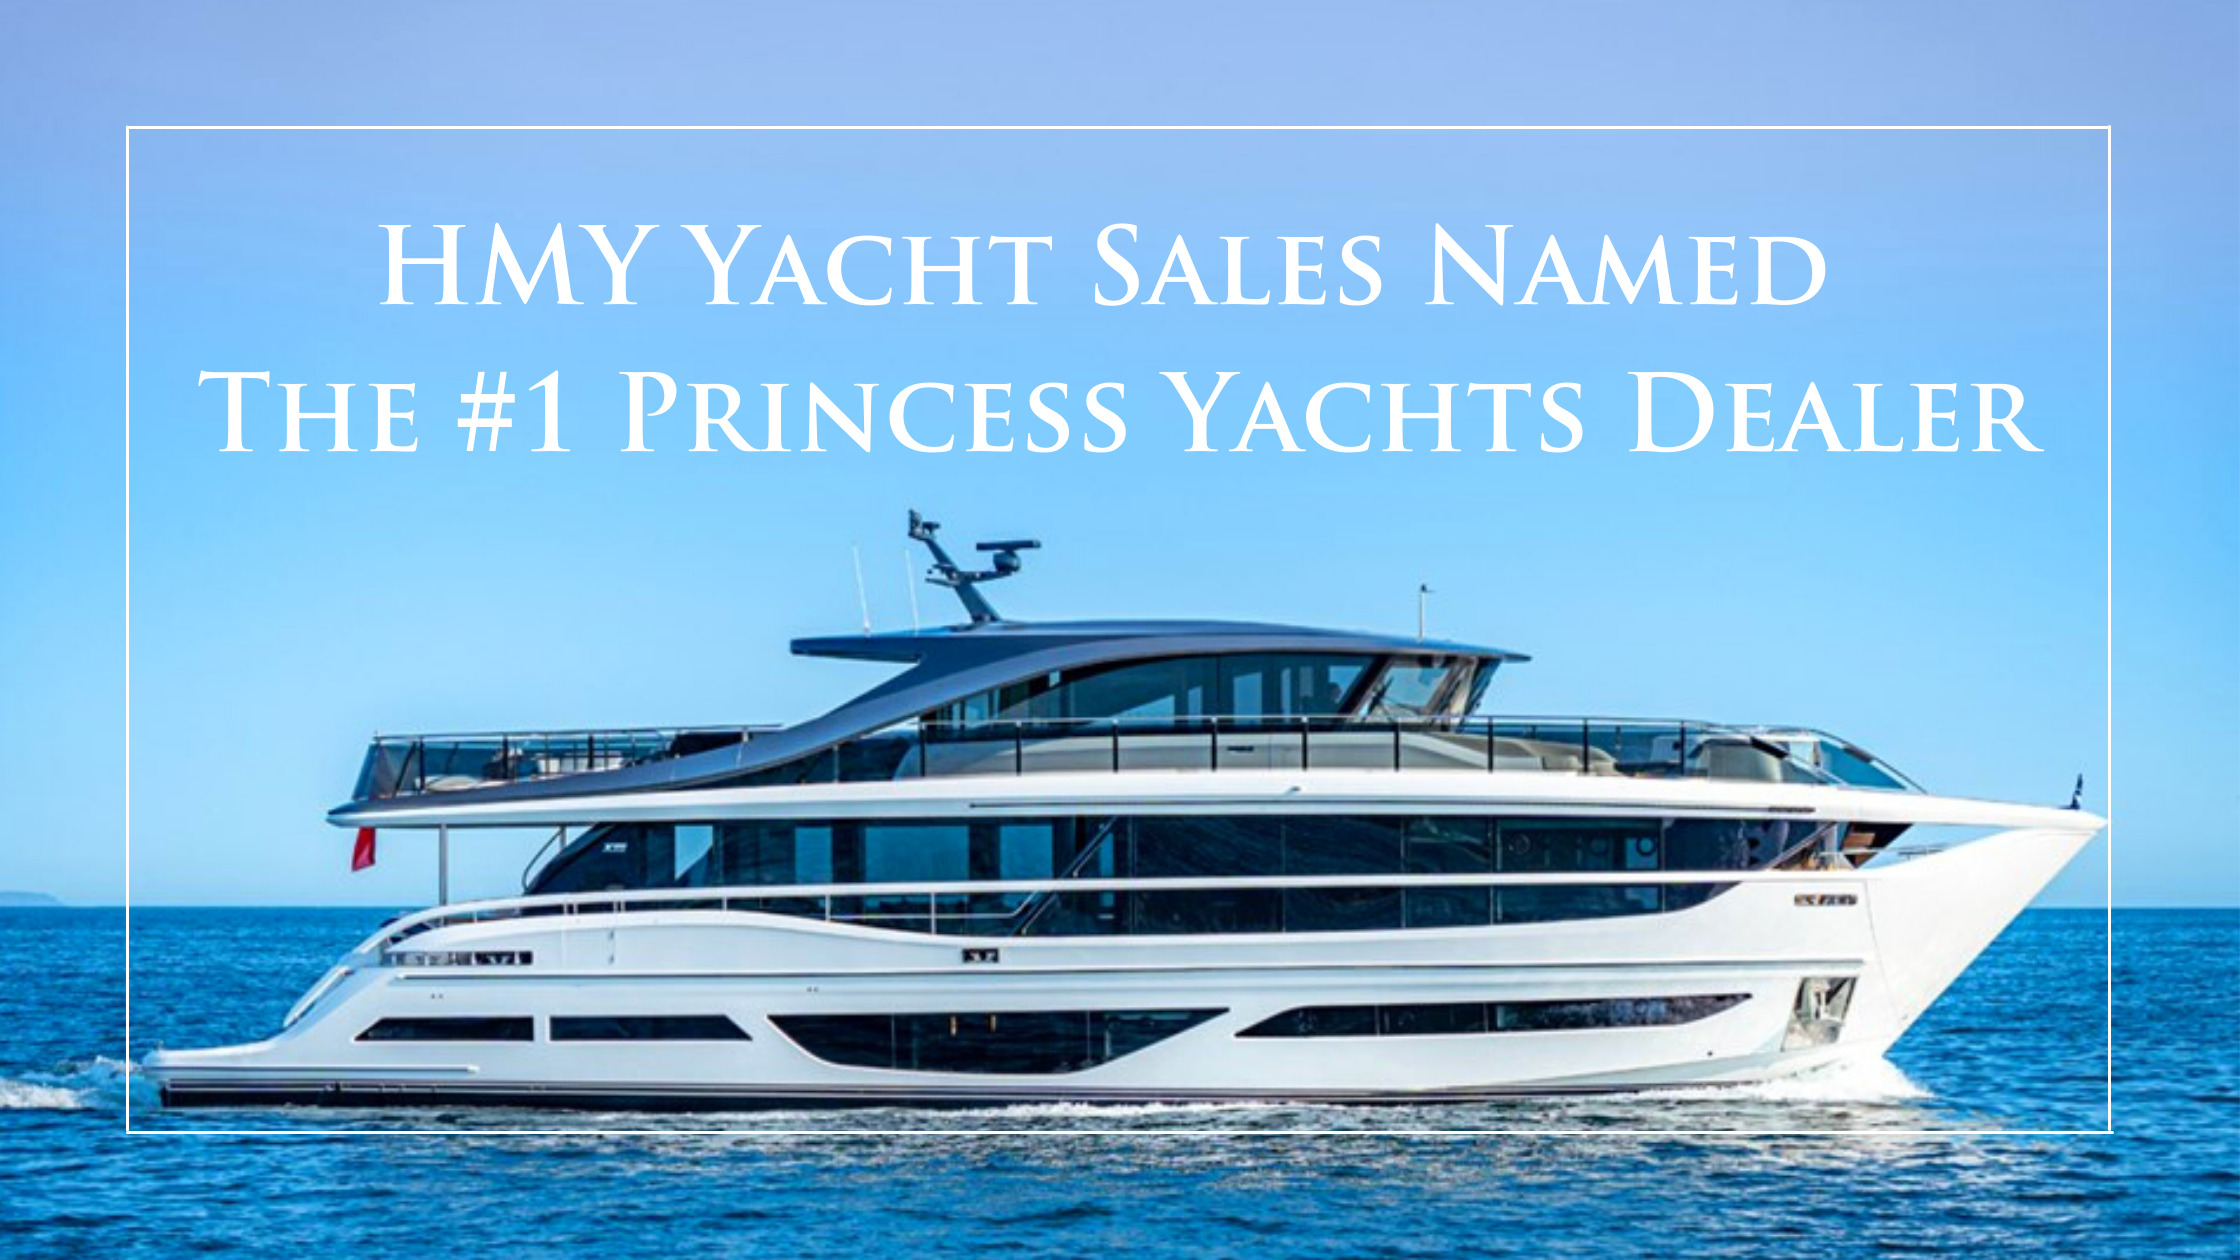 HMY Yacht Sales is Named The #1 Princess Yachts Dealer